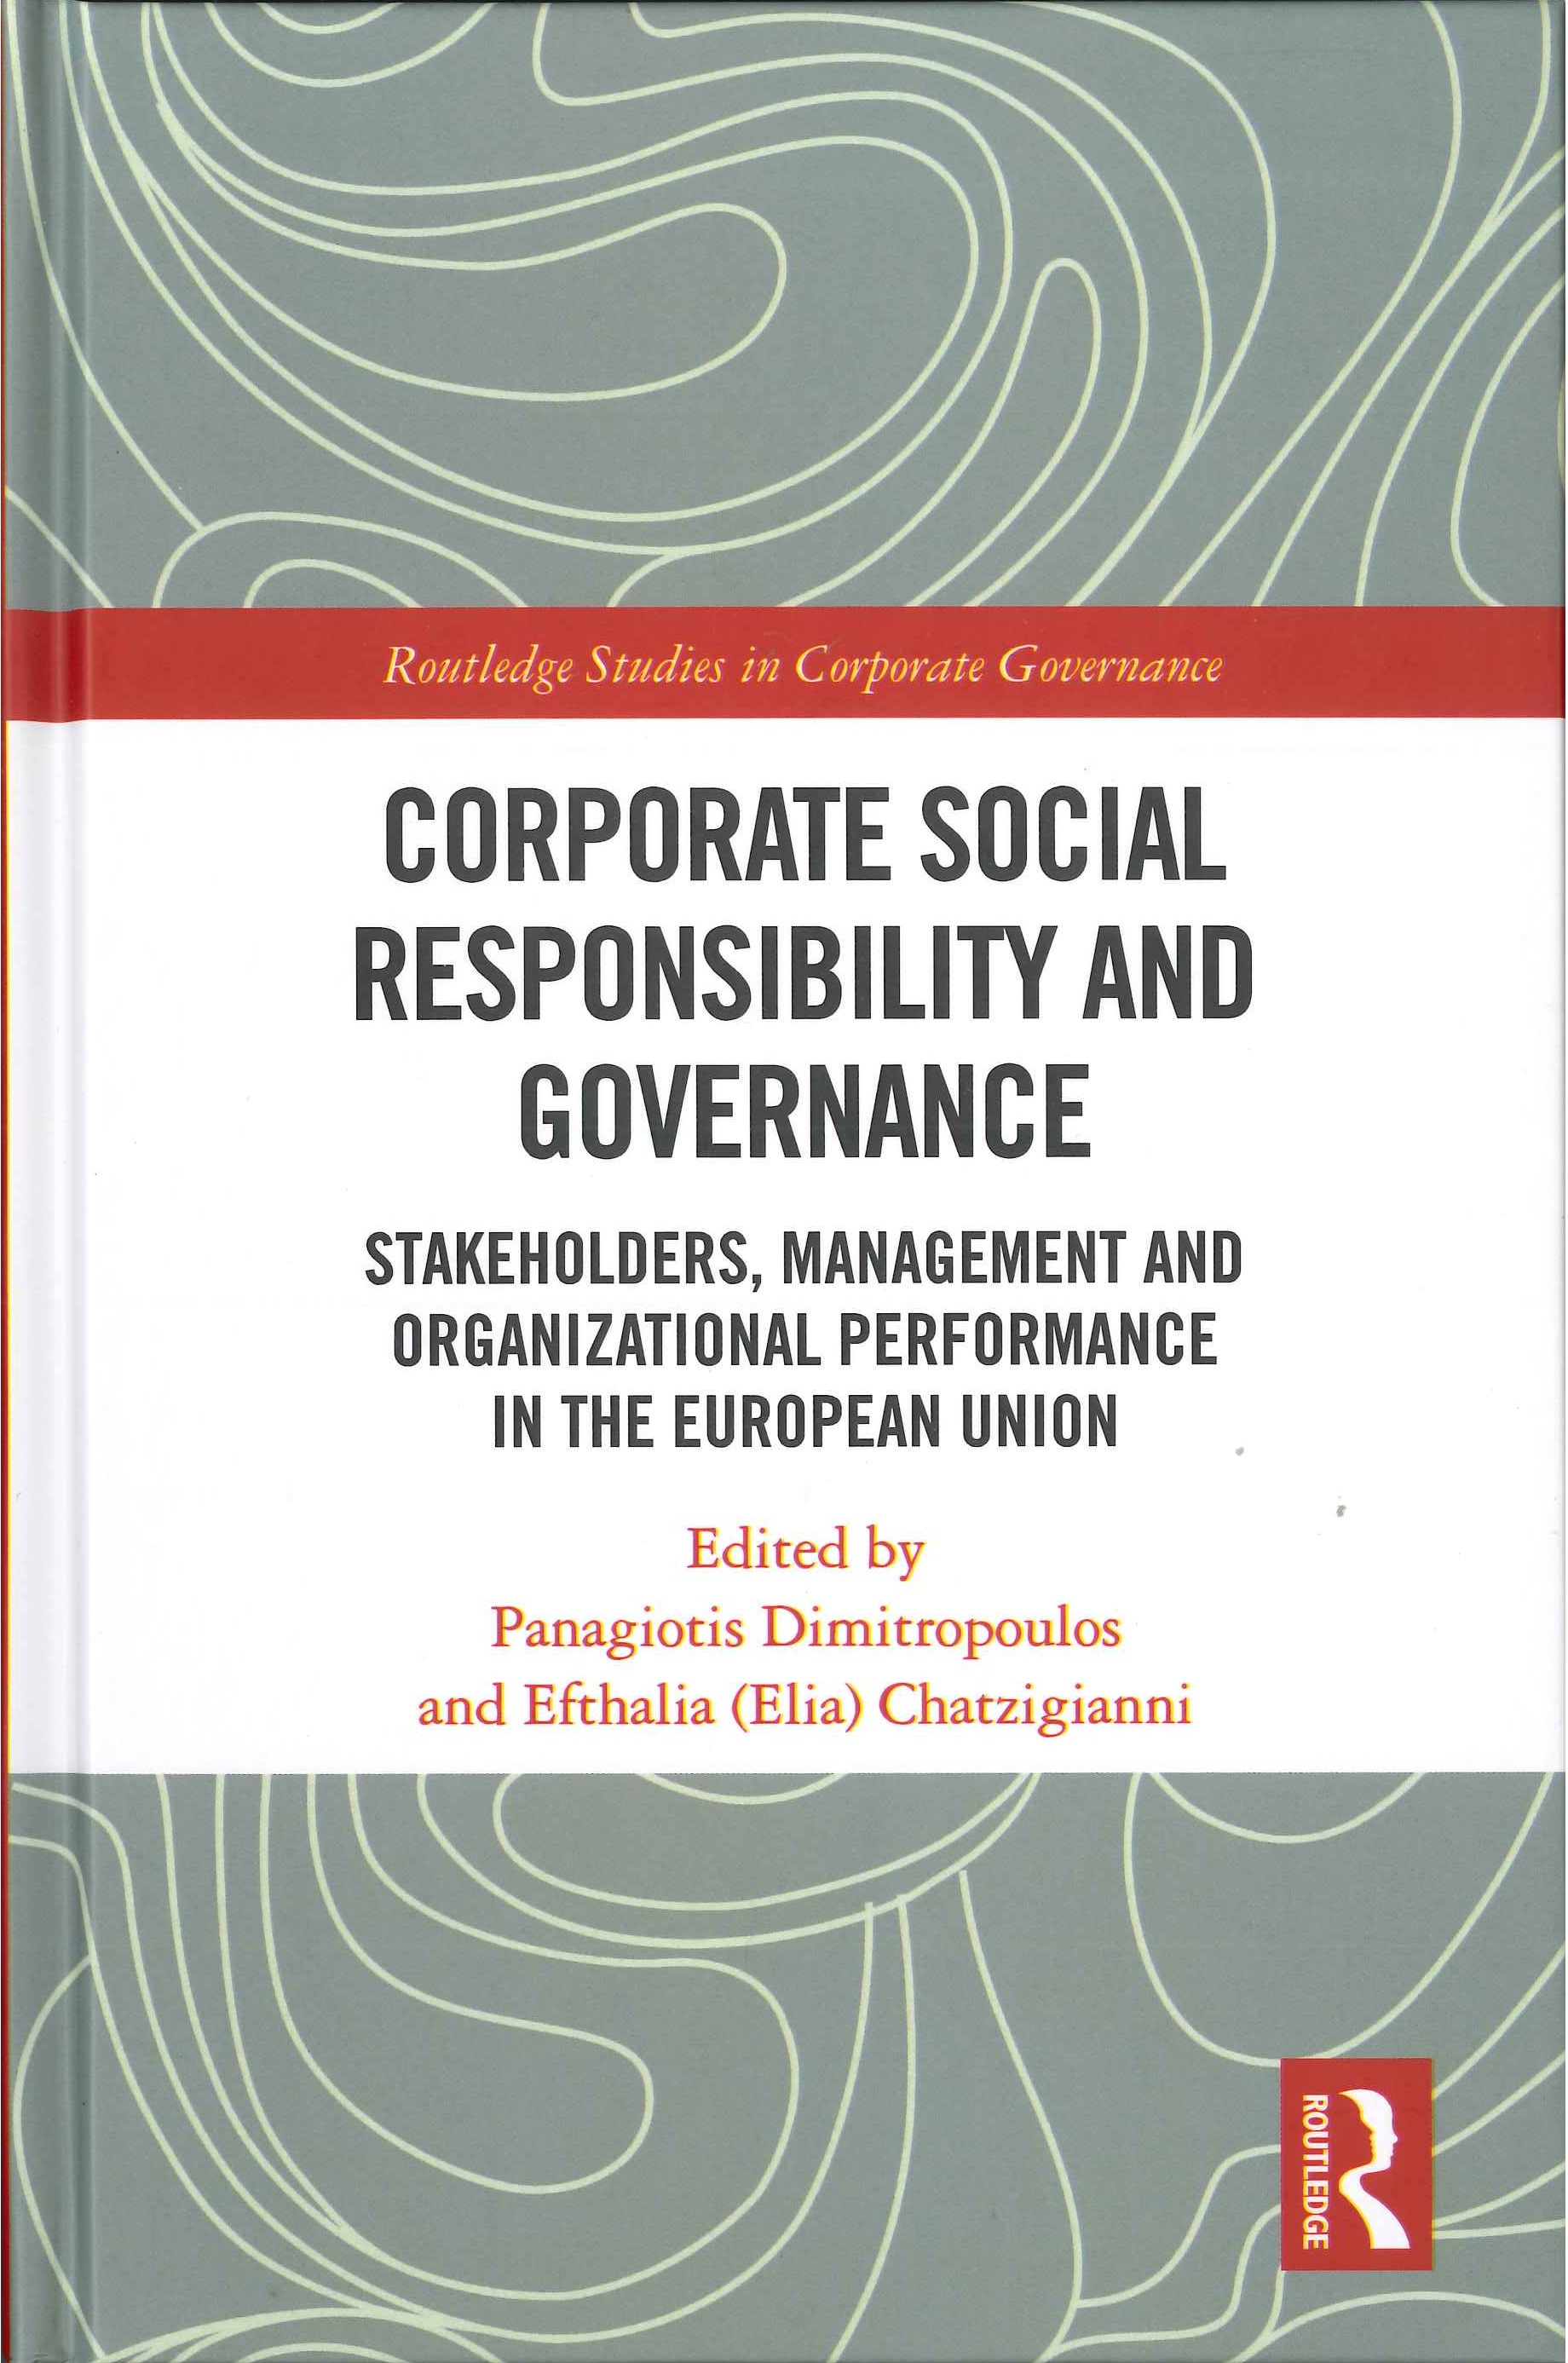 Corporate social responsibility and governance:stakeholders, management and organizational performance in the European Union